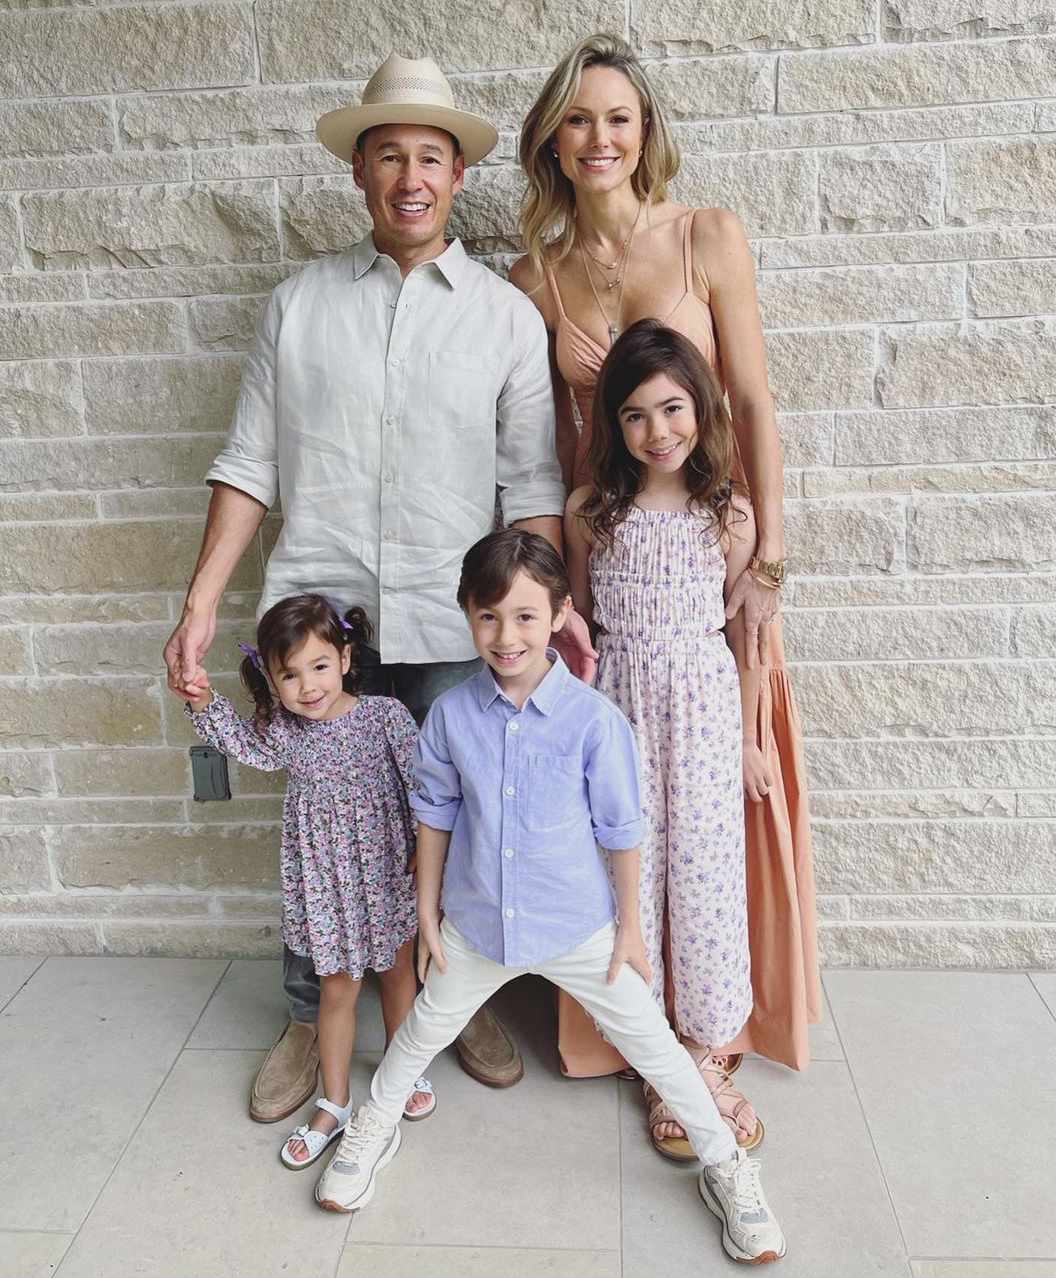 Stacy Keibler Shares Rare Family Photo with Husband and 3 Kids for Easter